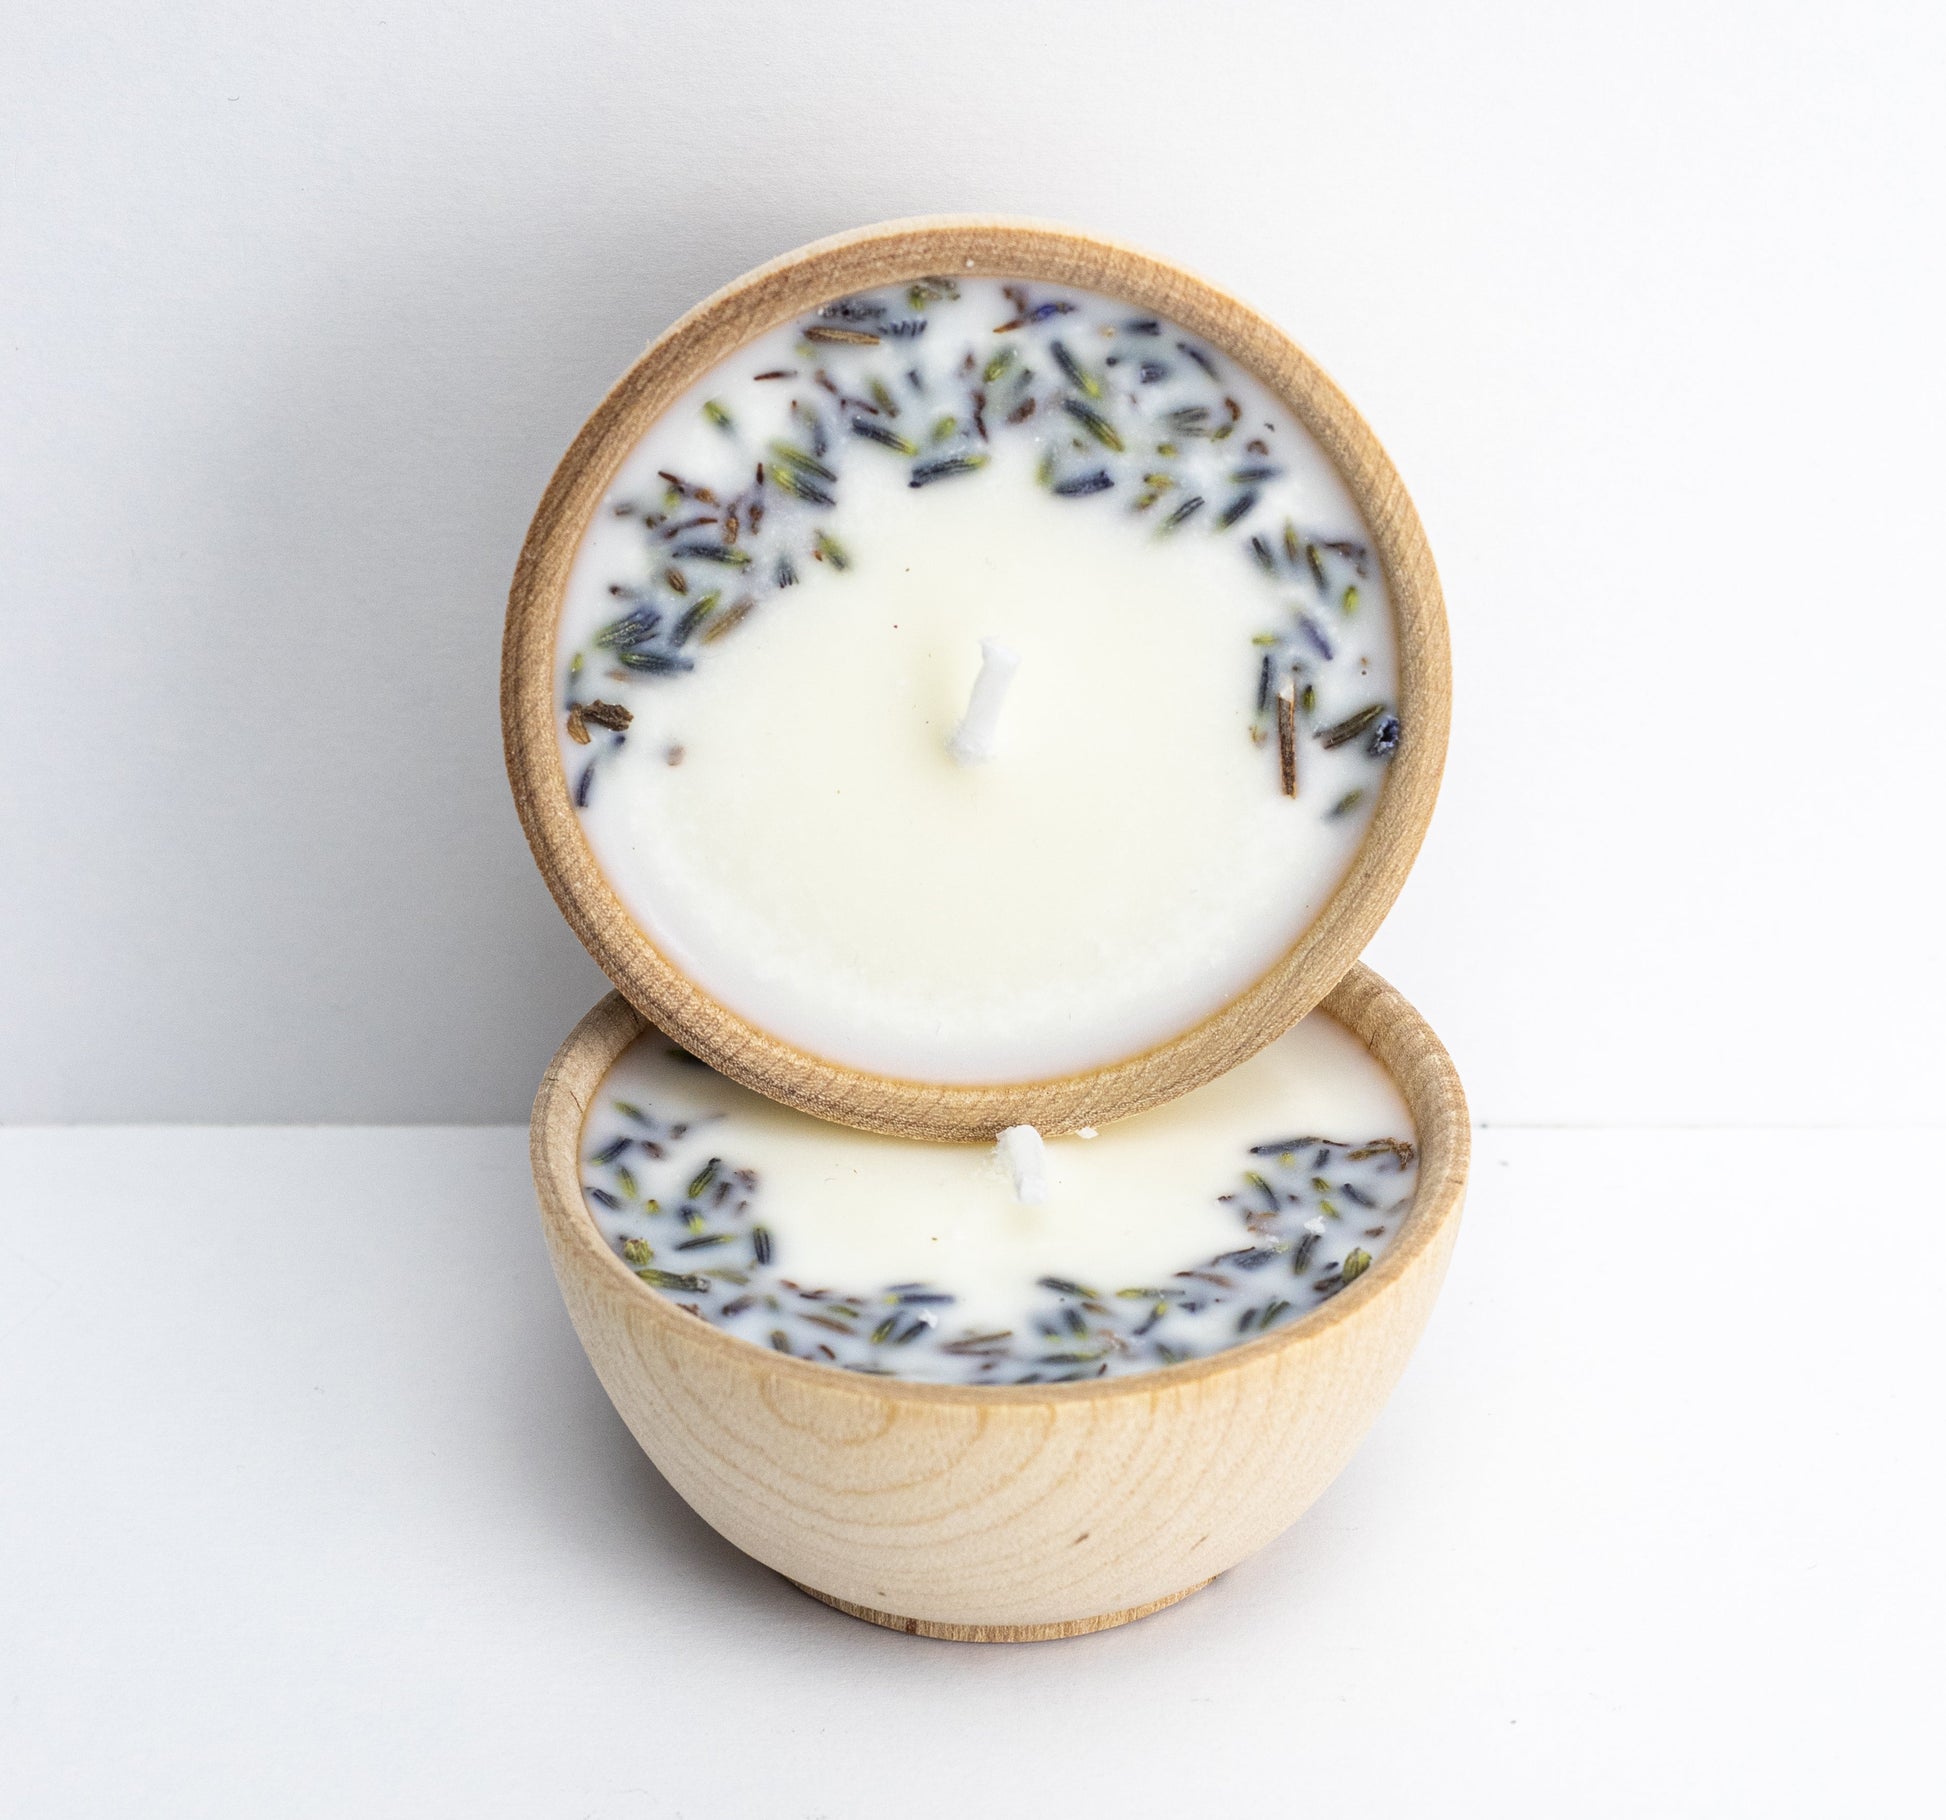 Wooden Tealight Aromatherapy Soy Candle, 1oz